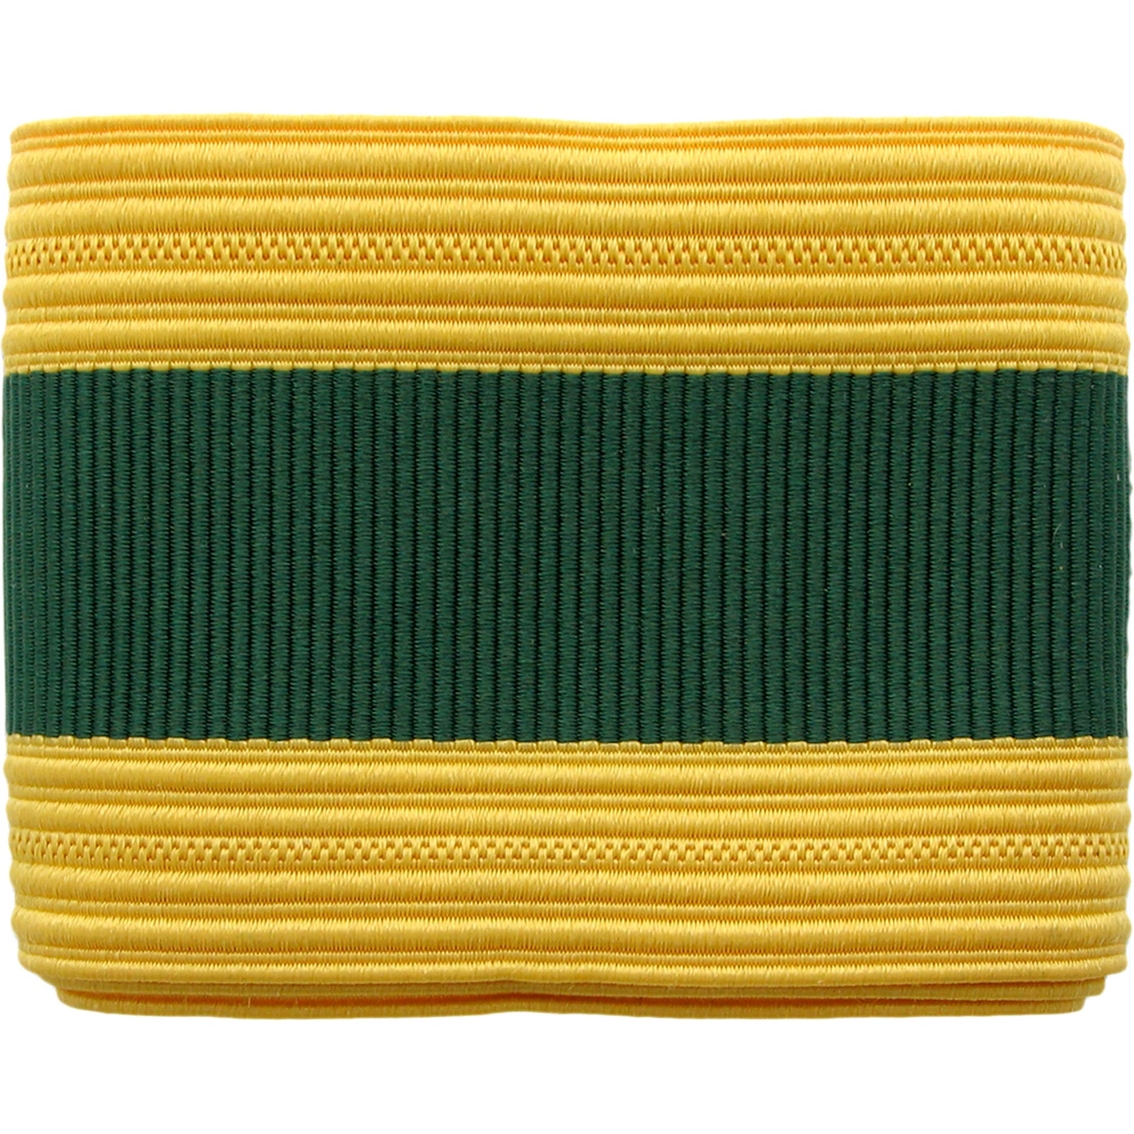 Army Service Cap Hatband, Special Forces